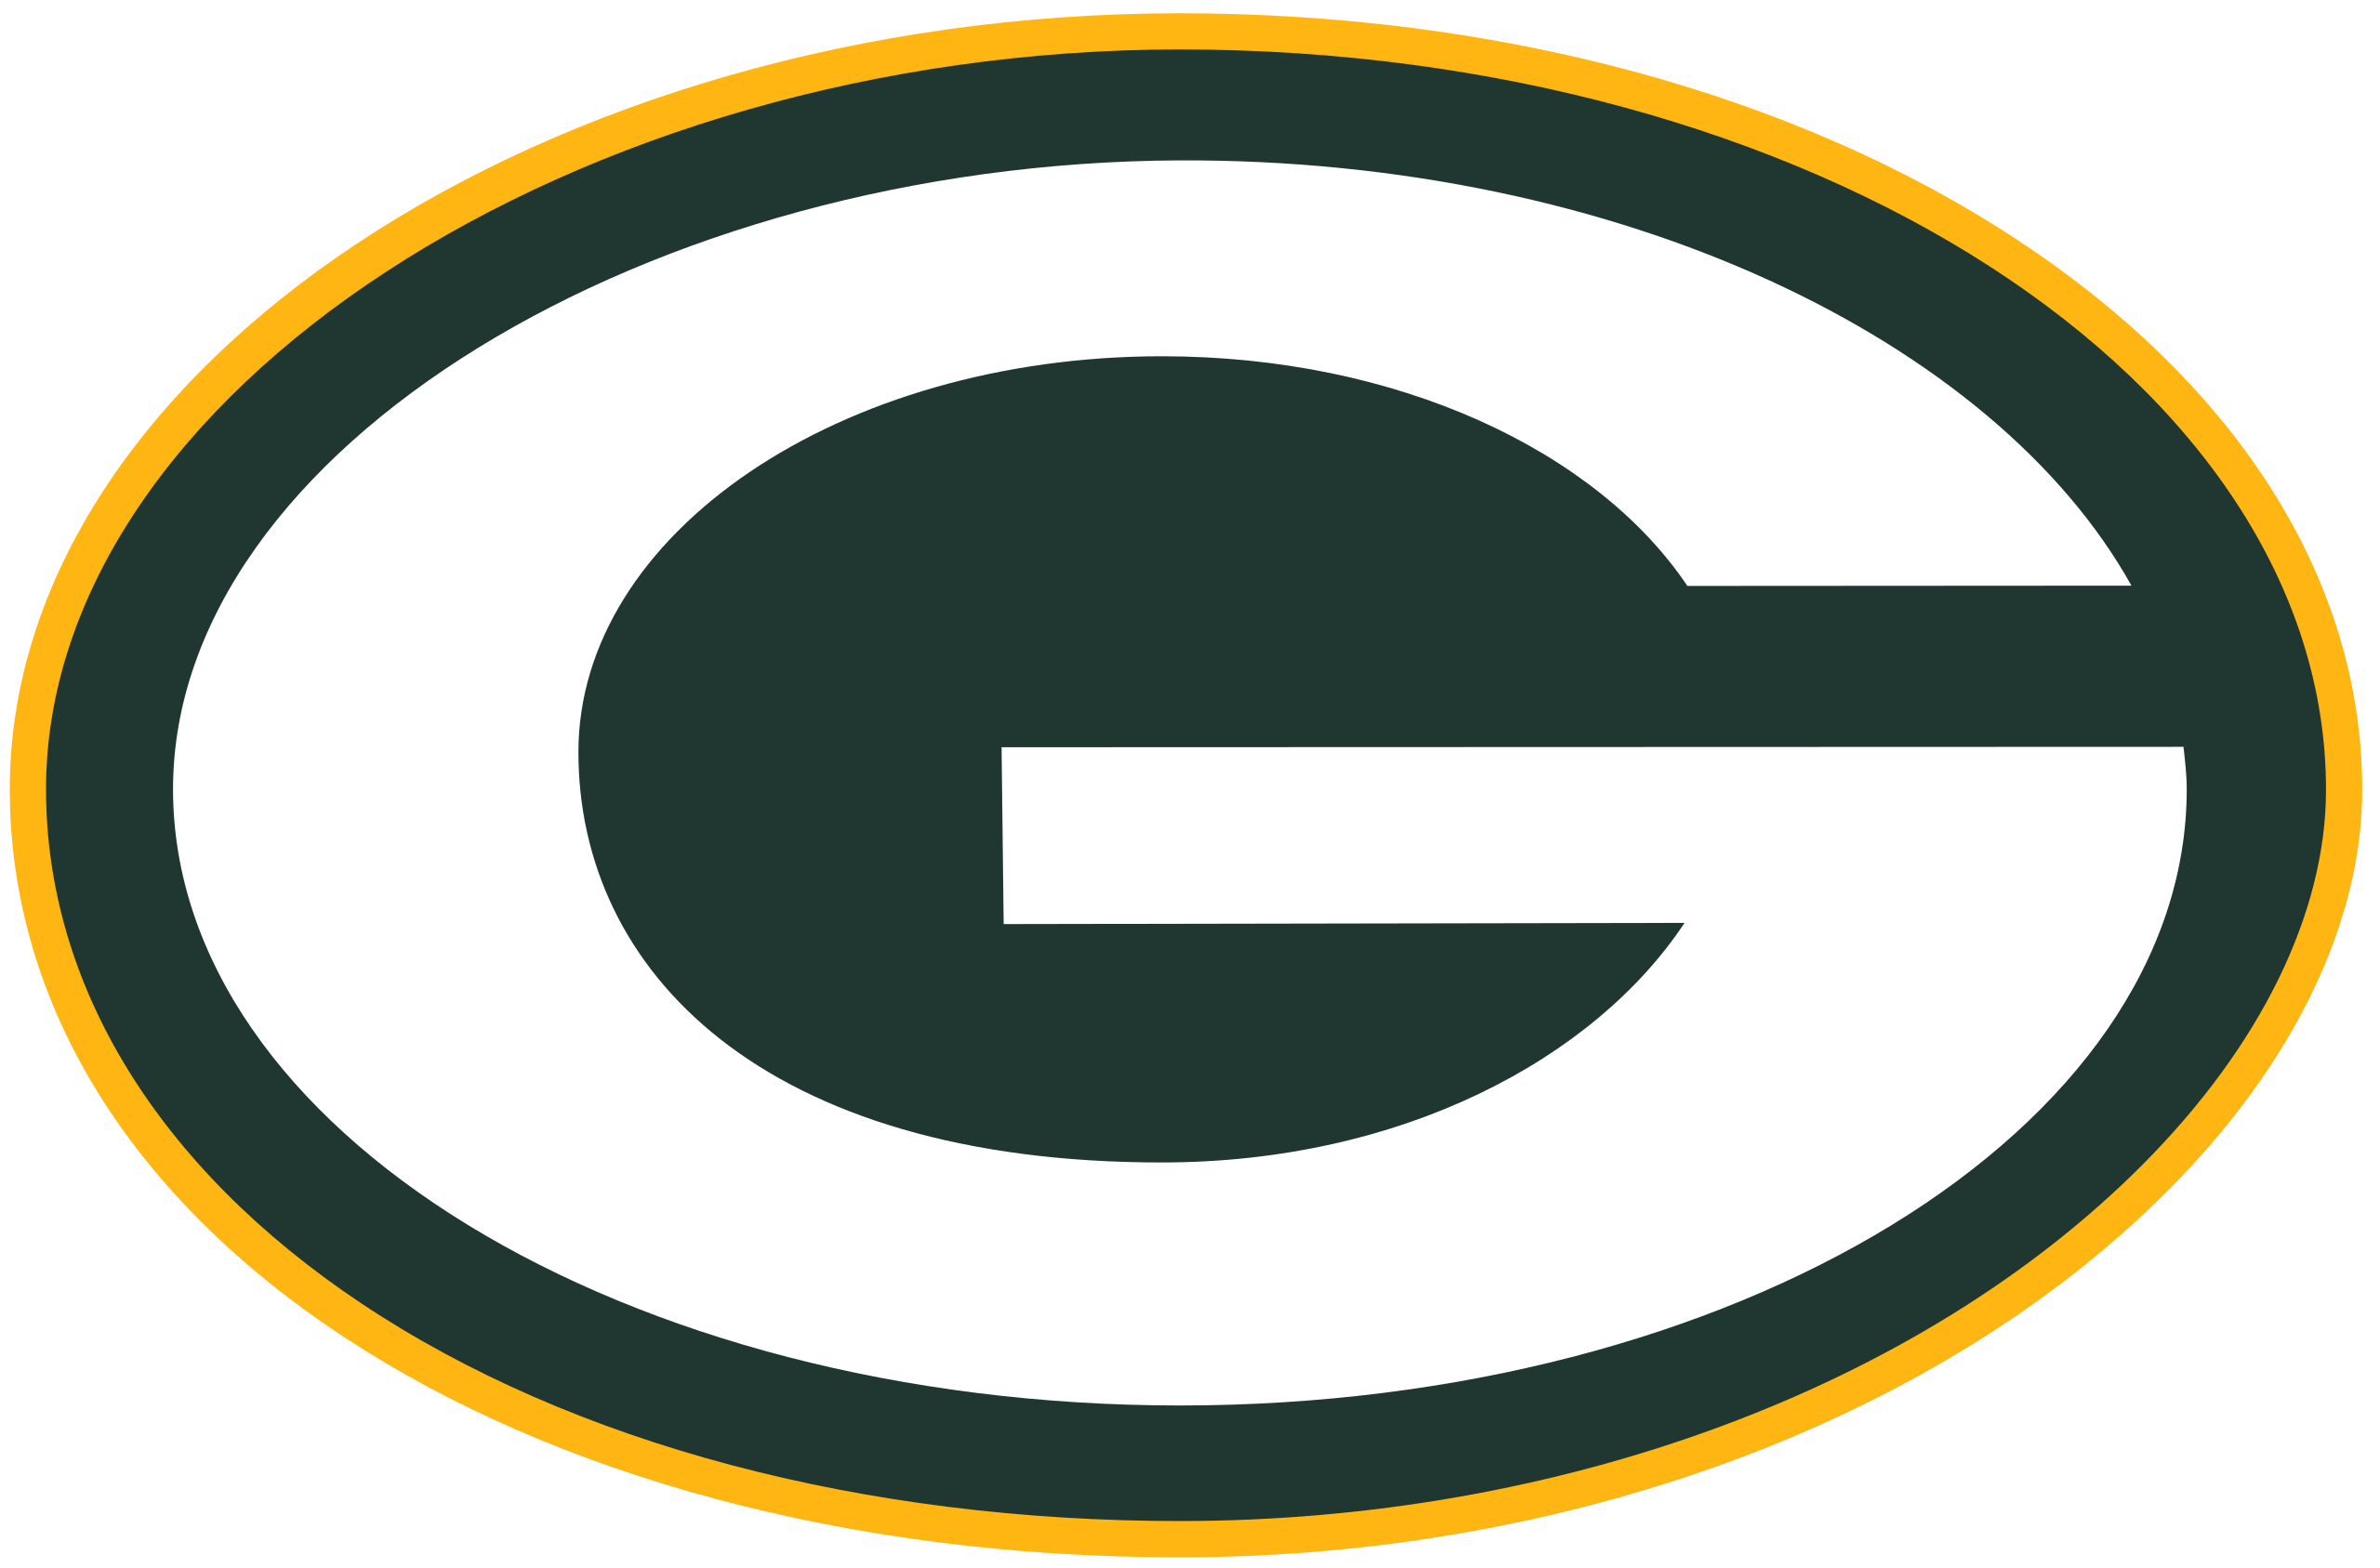 Green Bay Packers Color Codes Hex, RGB, and CMYK Team Color Codes